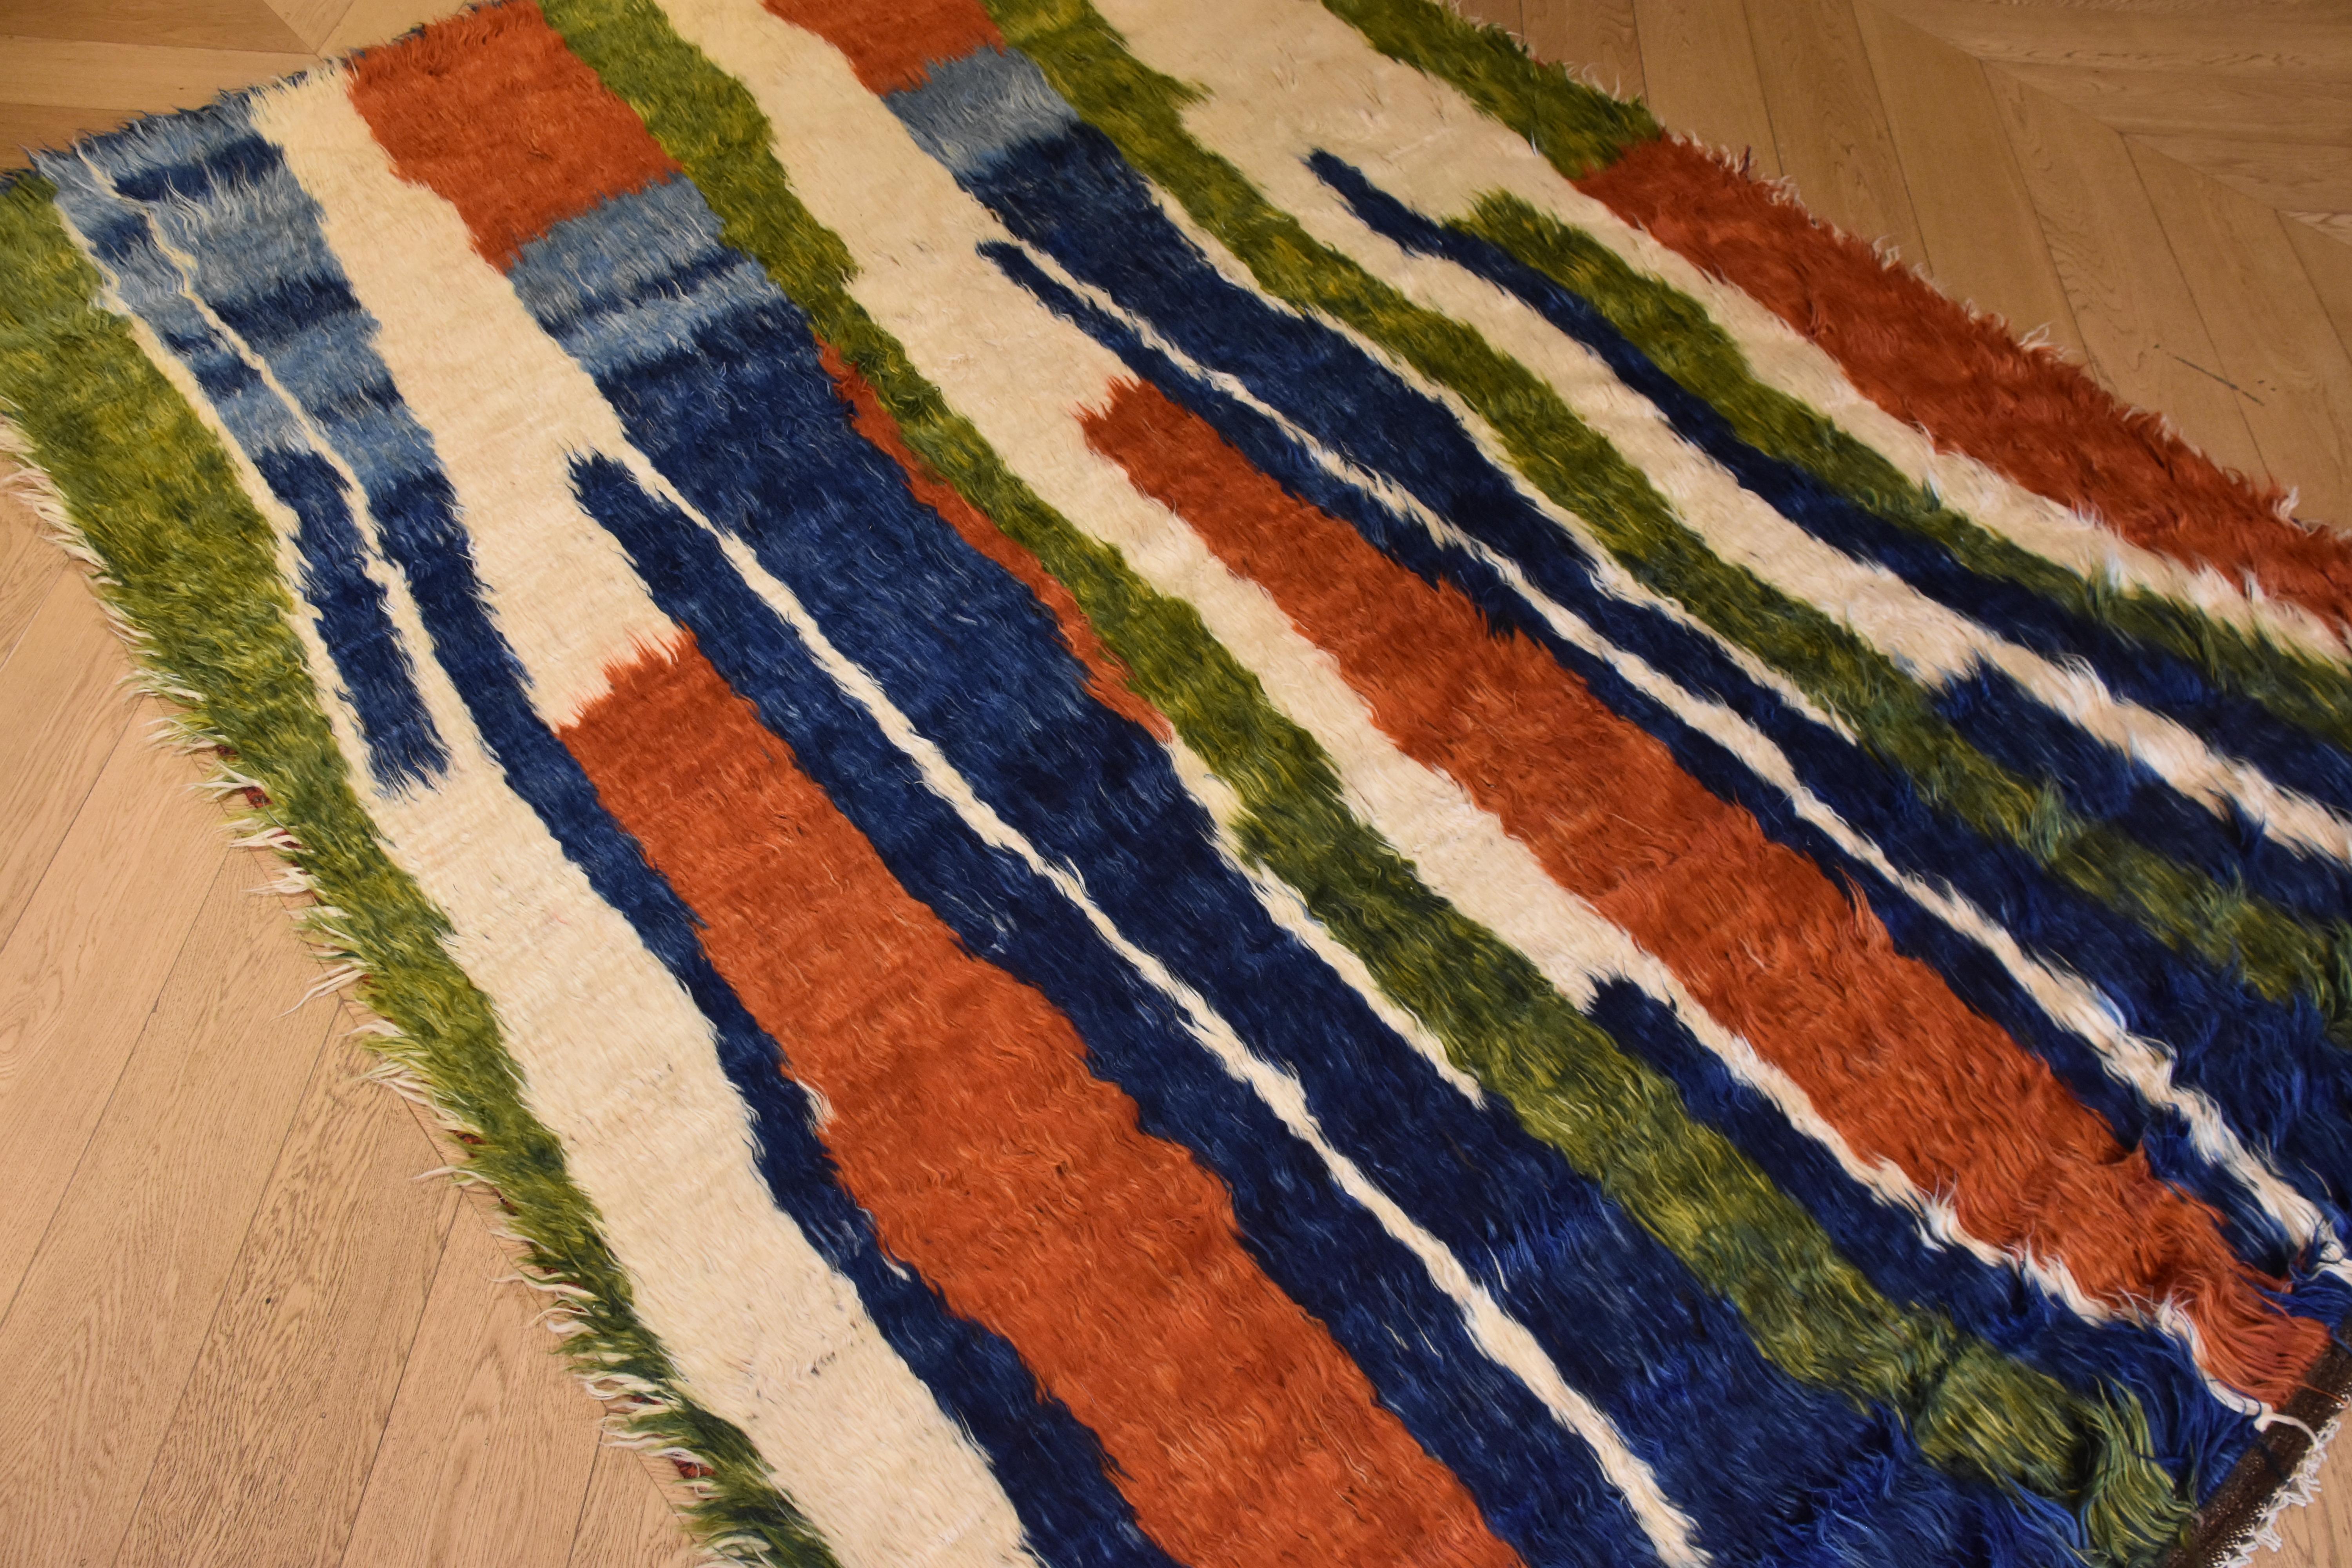 Tribal 21st Century Green Blue Red and White Nomadic Afghan Rug, circa 2010s